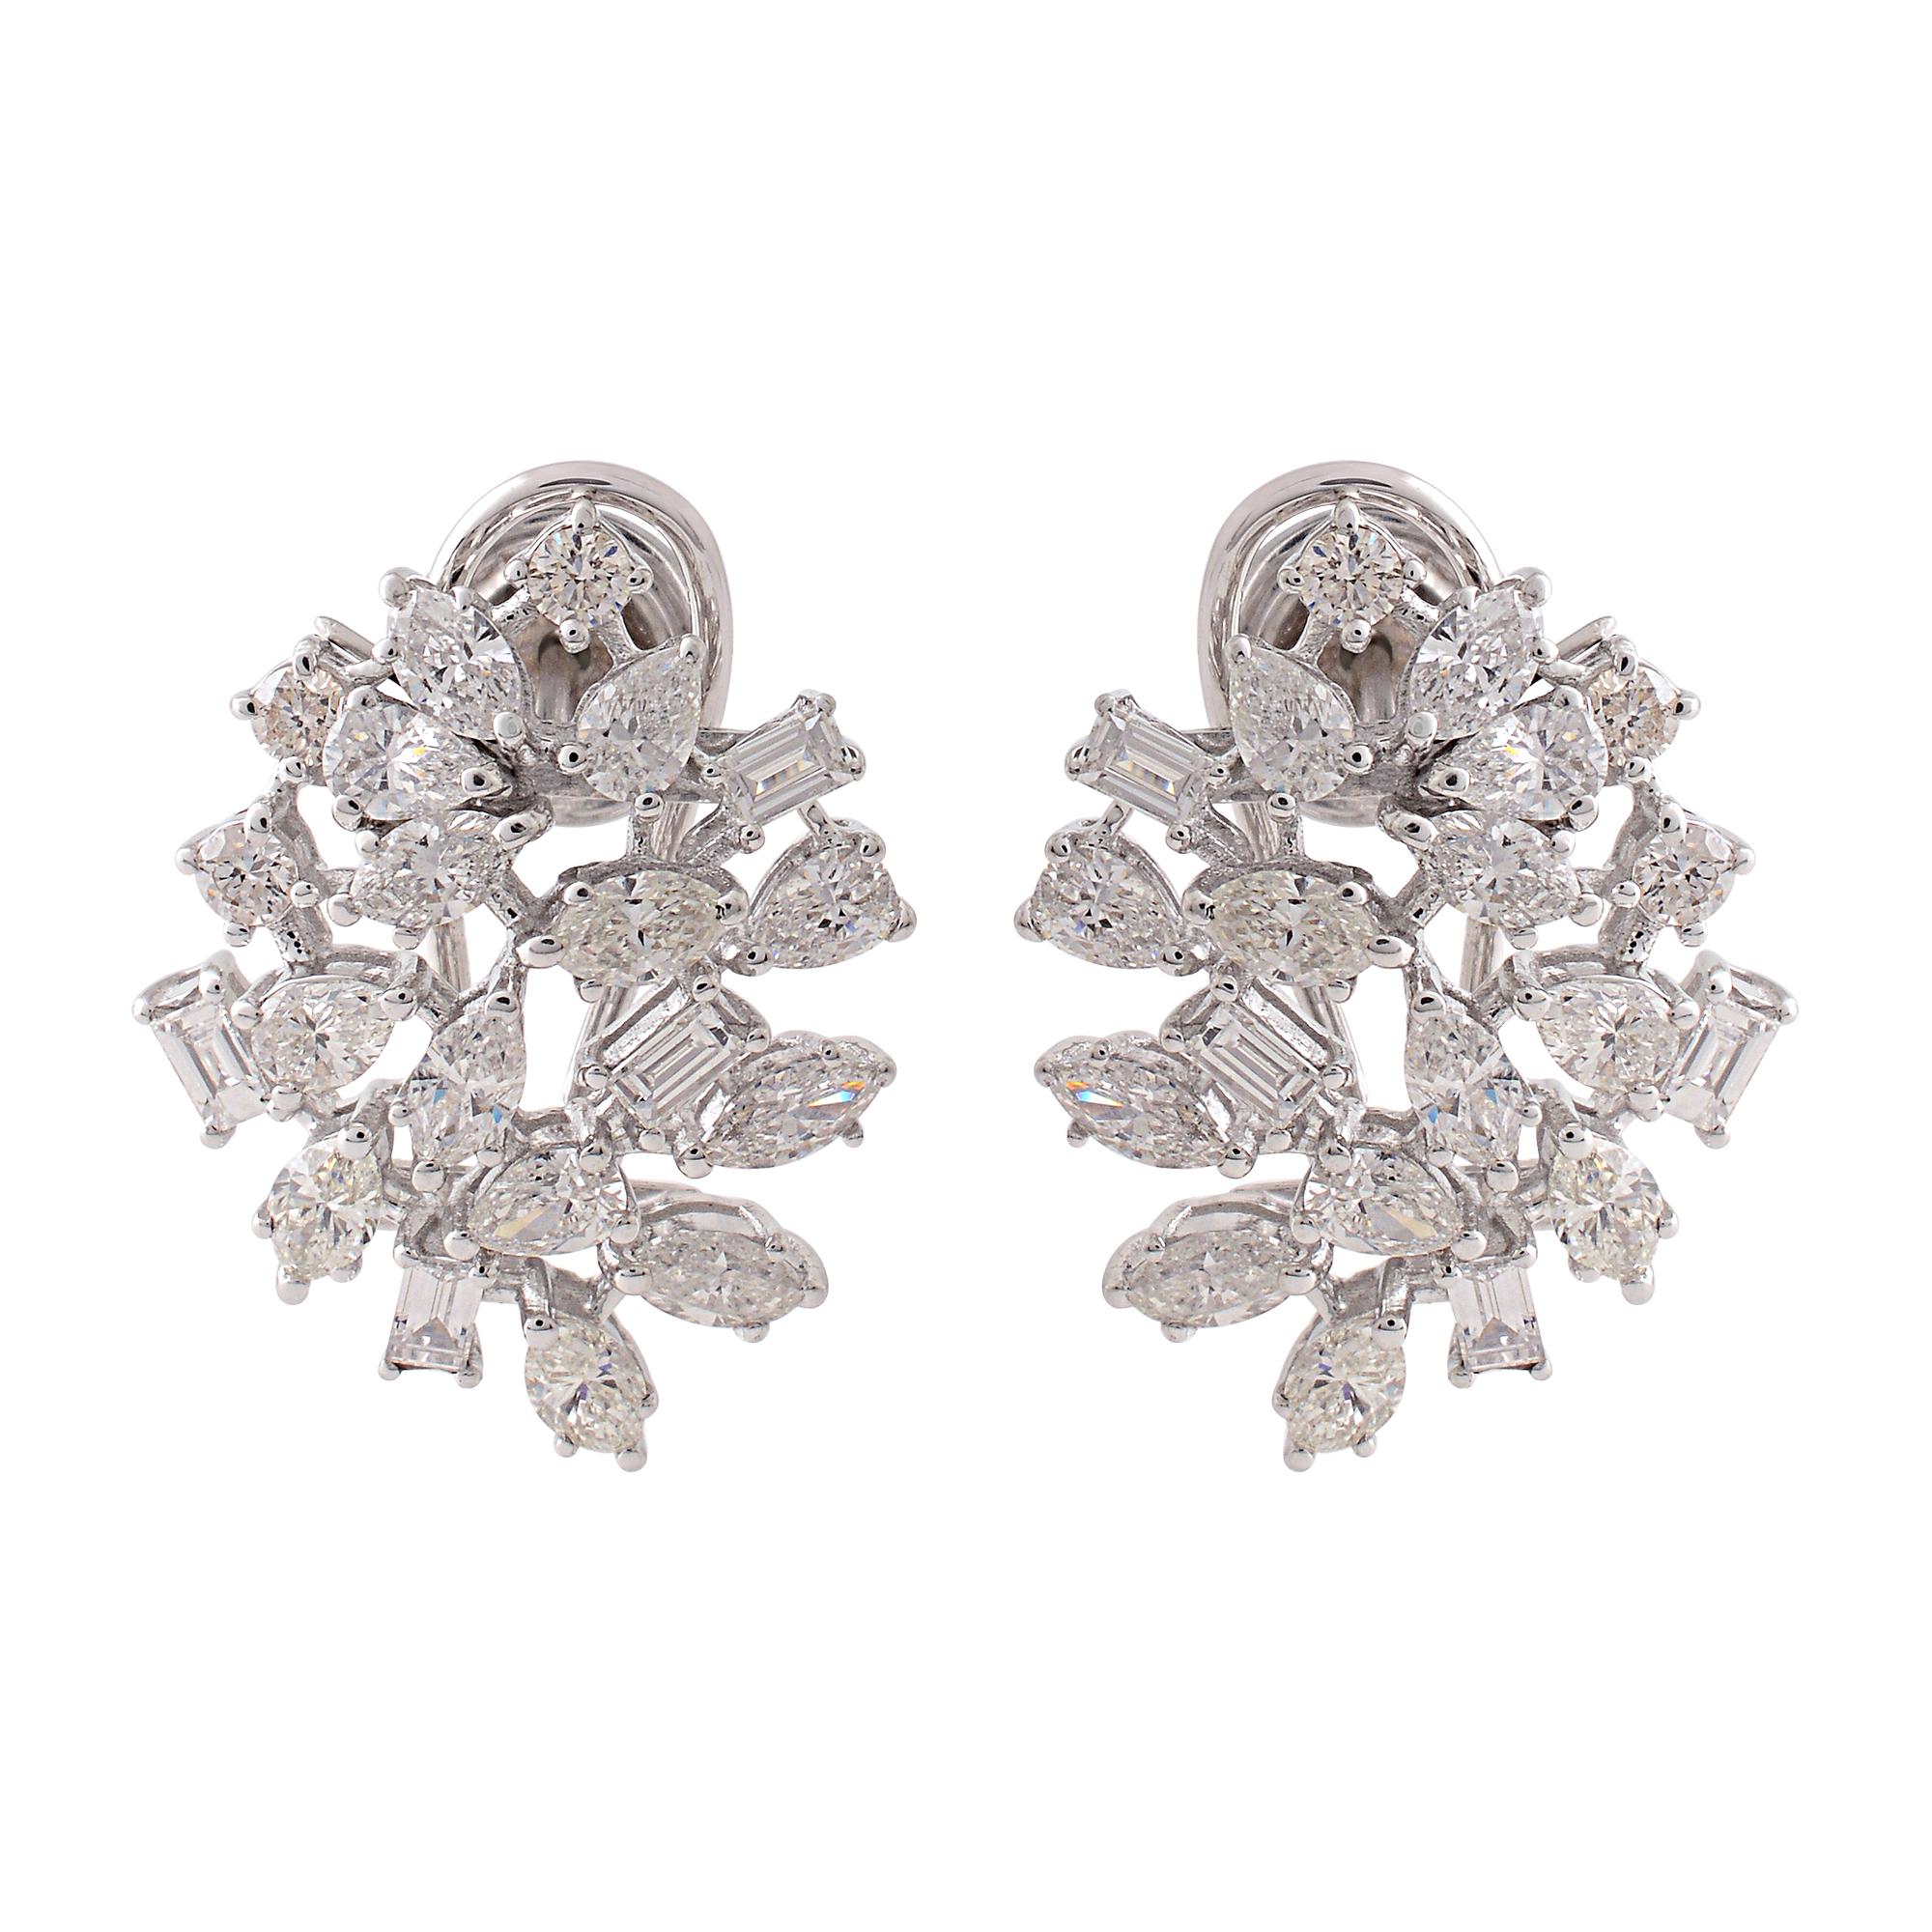 Item Code :- SEE-1465
Gross Weight :- 6.78 gm
18k White Gold Weight :- 6.25 gm
Diamond Weight :- 2.65 carat  ( AVERAGE DIAMOND CLARITY SI1-SI2 & COLOR H-I )
Earrings Size :- 20x16 mm approx.
✦ Sizing
.....................
We can adjust most items to